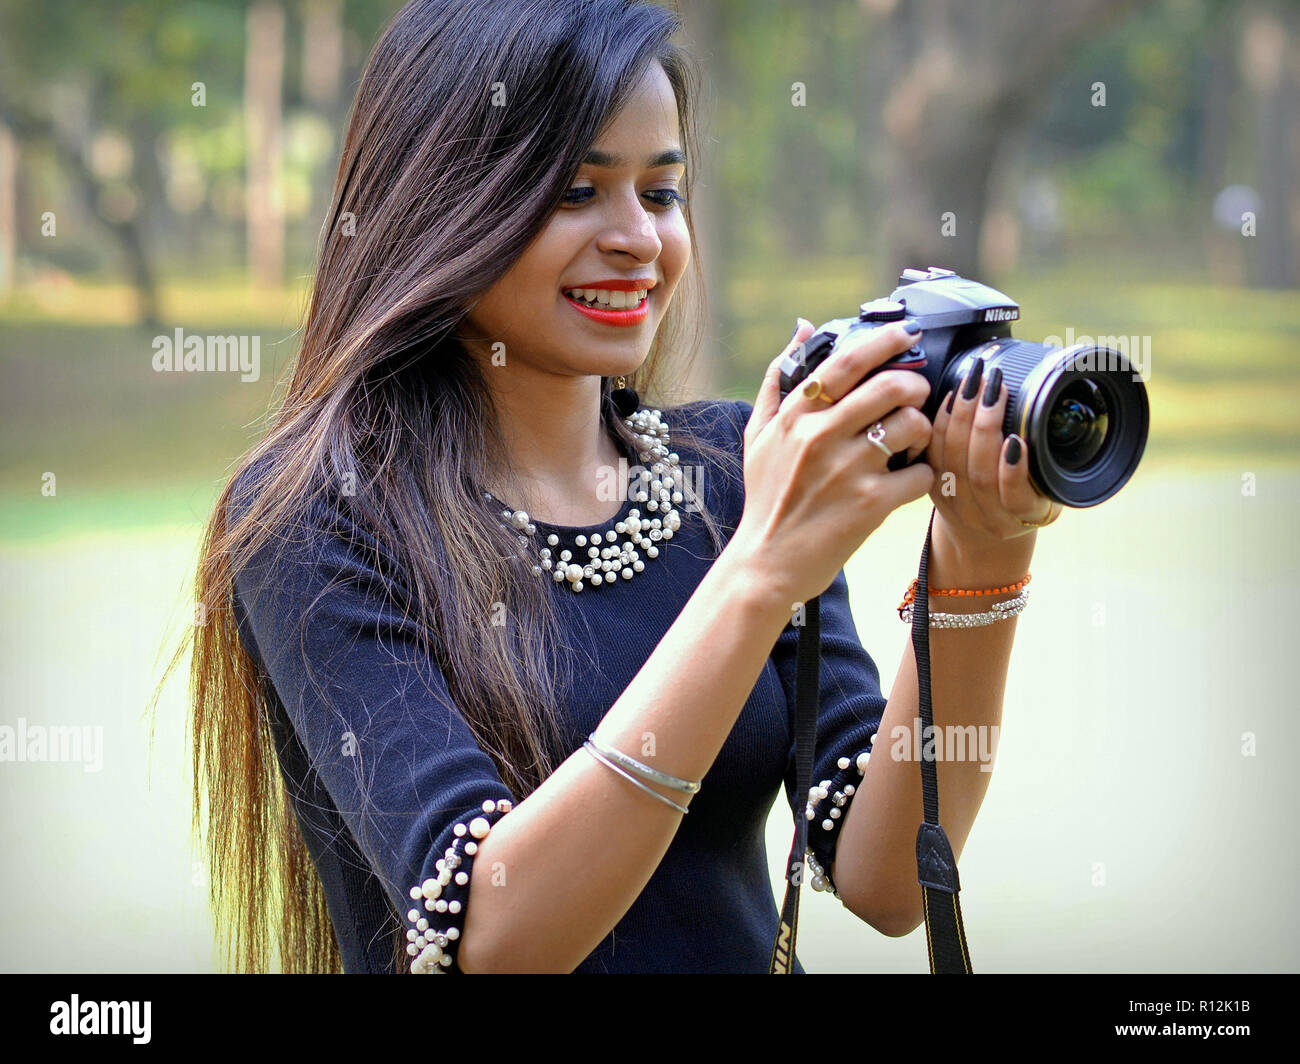 Young Indian female photographer with very long hair looks at the camera screen of her Nikon D7200 DSLR camera. Stock Photo